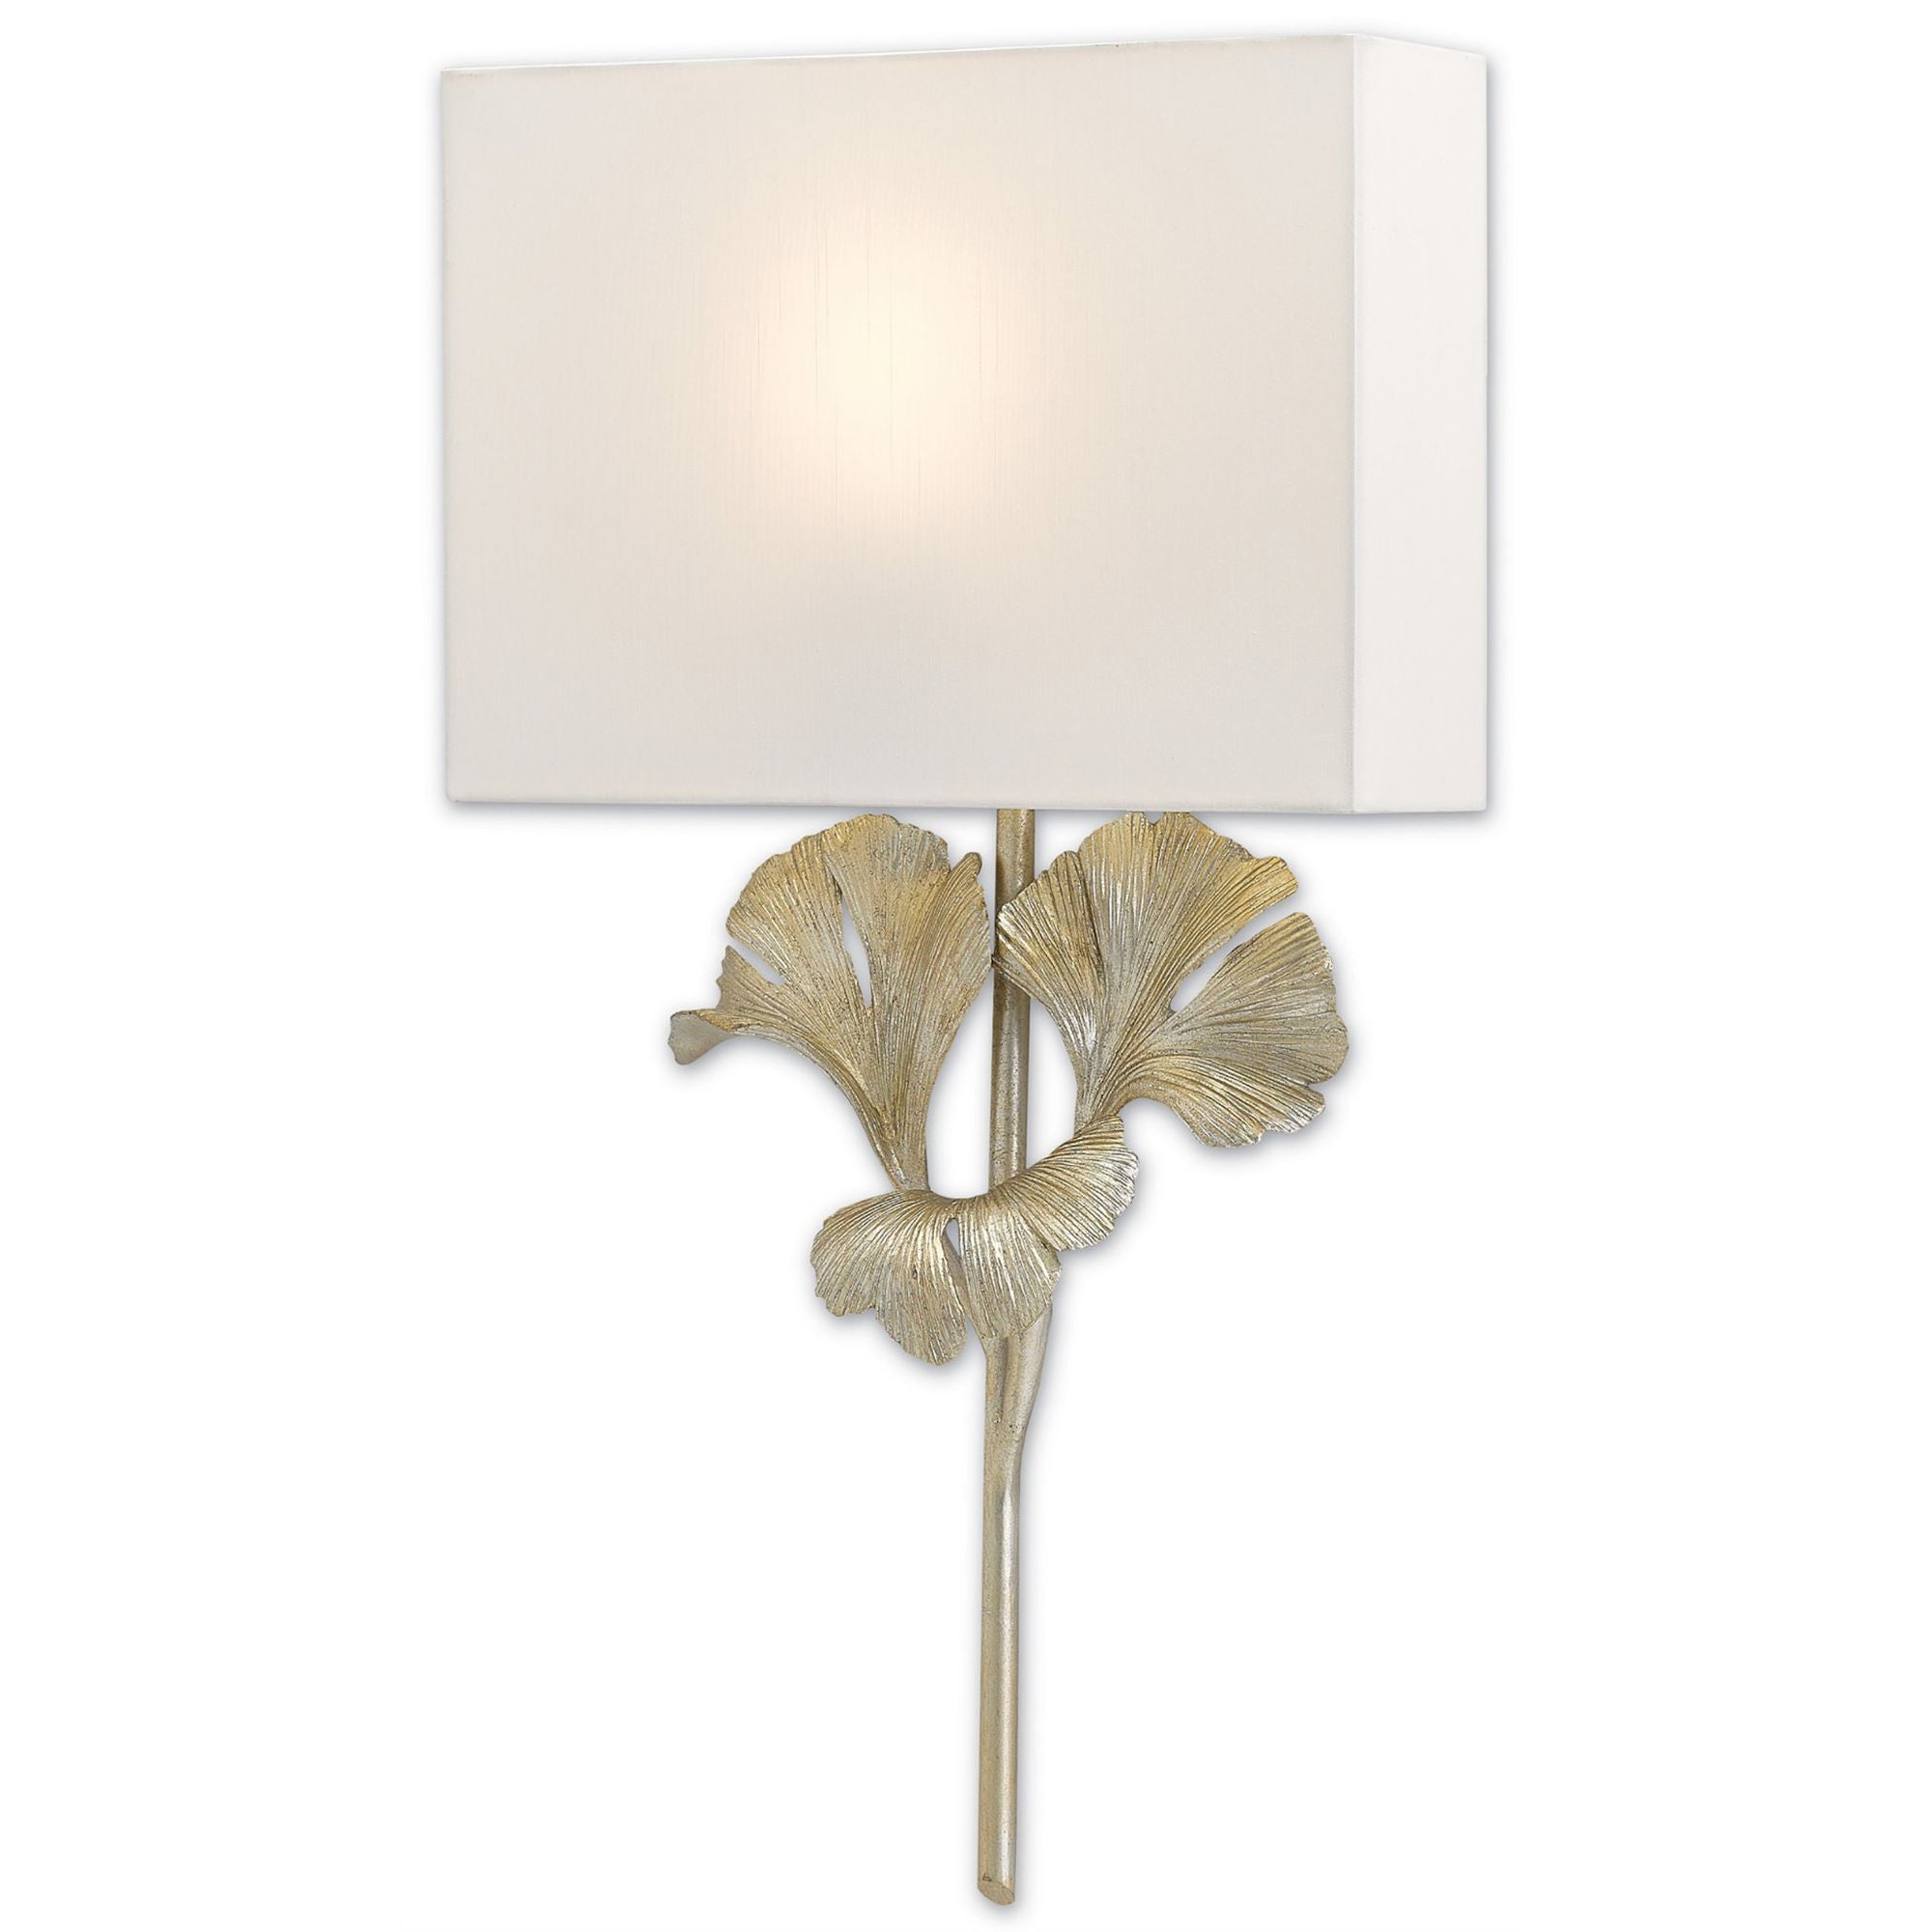 Gingko Silver Wall Sconce - Distressed Silver Leaf